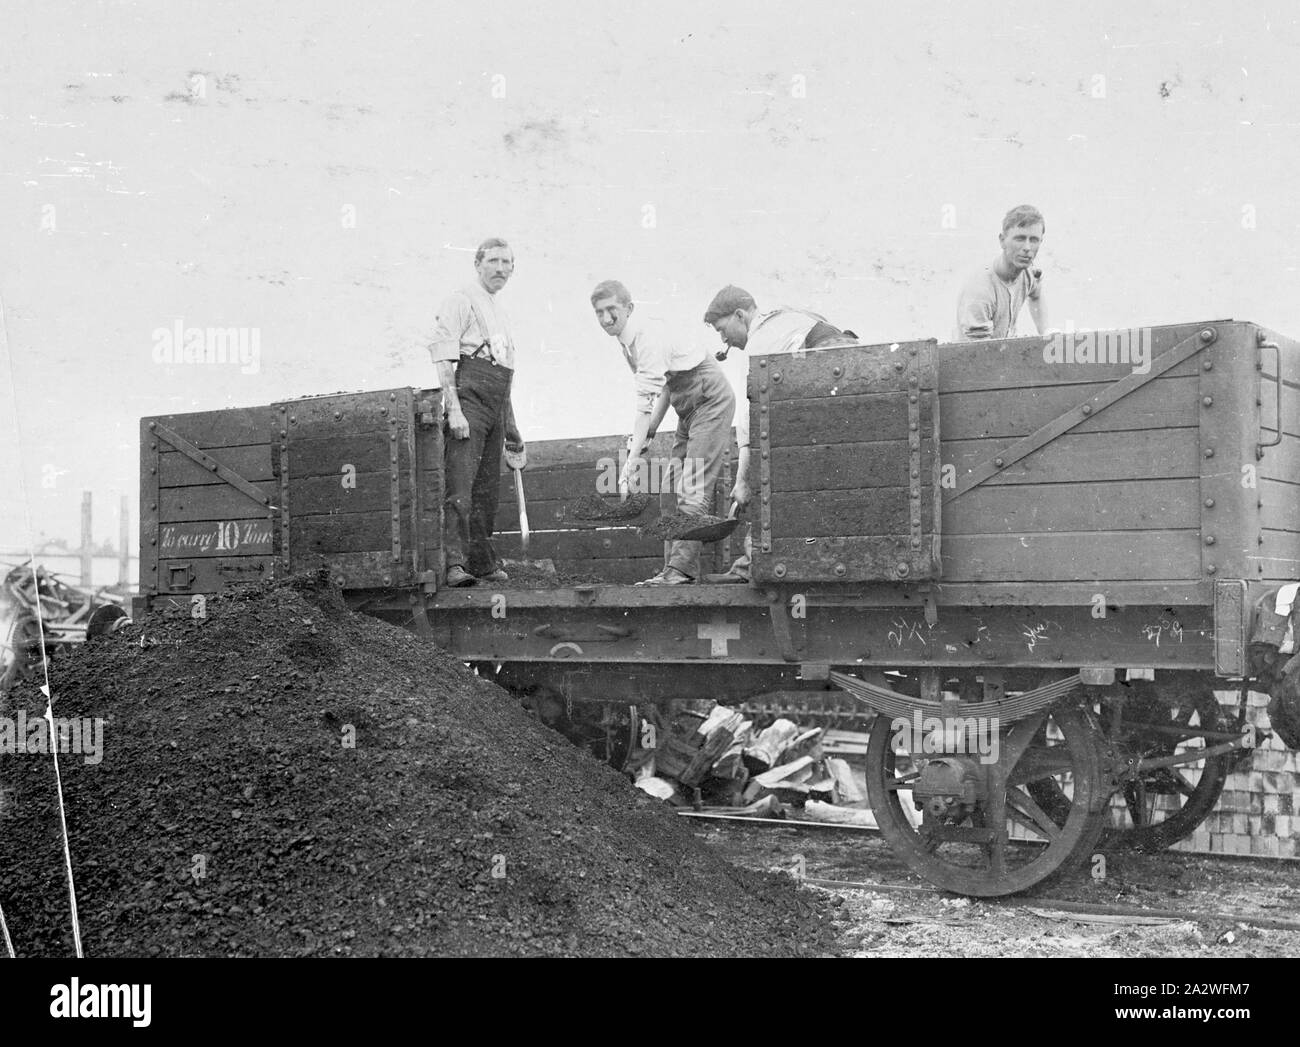 Photograph - Staff Unloading Coal, Sunshine, Victoria, 1911, Black and white photograph of office staff at Sunshine Harvester Works unloading coal from the Railway Trucks at the factory during the 1911 strike. Photograph is located in an album: Volume No.1: 'Views of Factories and Branches', page 10. This is one of 25 albums that provide detailed visual documentation of the activities of the McKay enterprise. a collection of Stock Photo